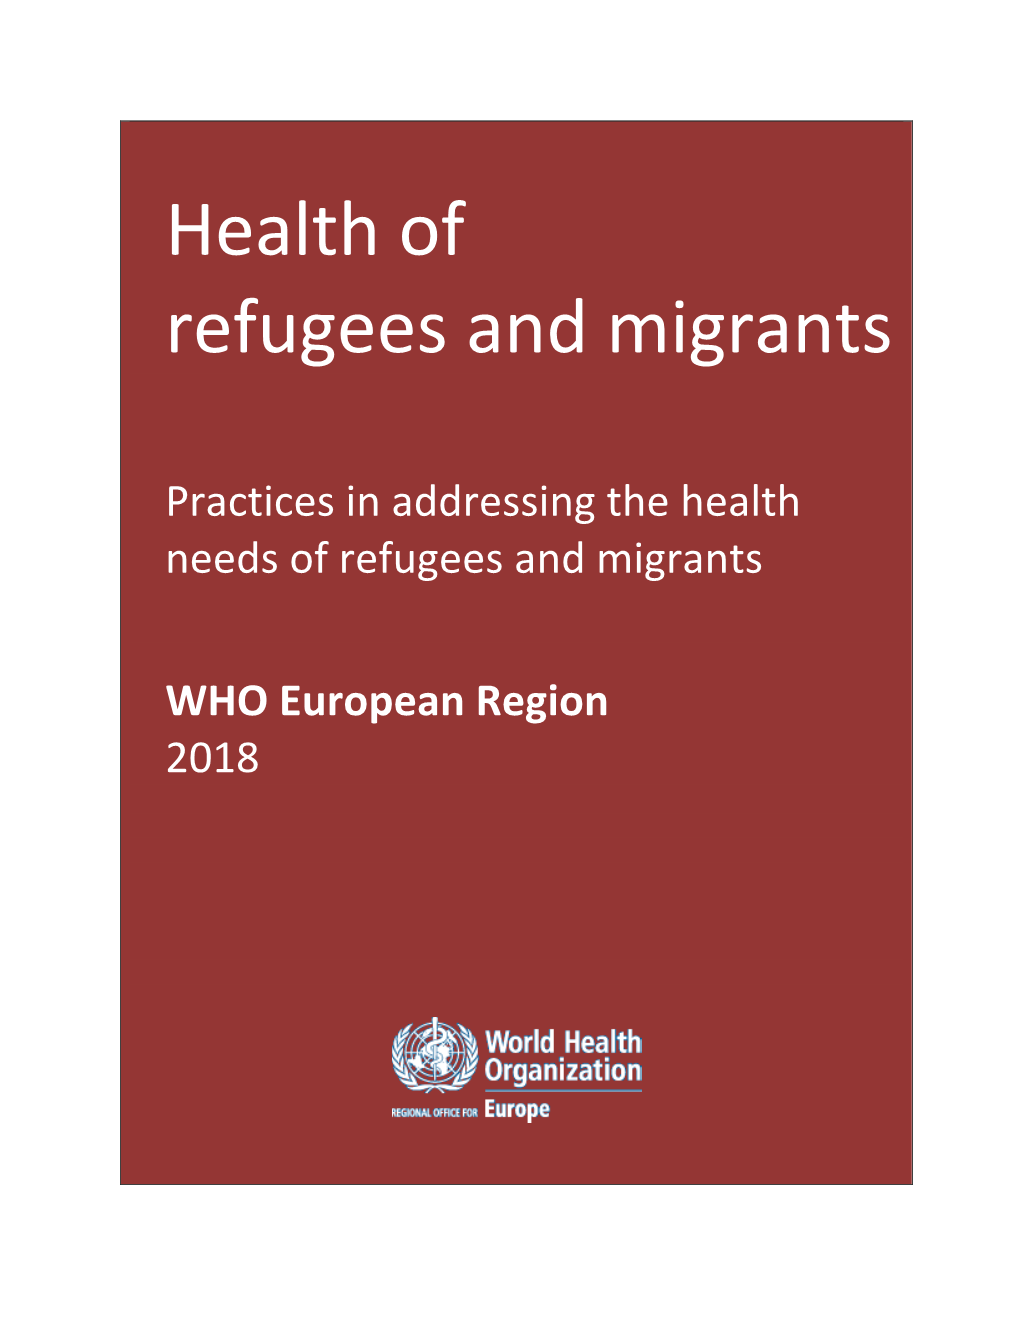 Practices in Addressing the Health Needs of Refugees and Migrants